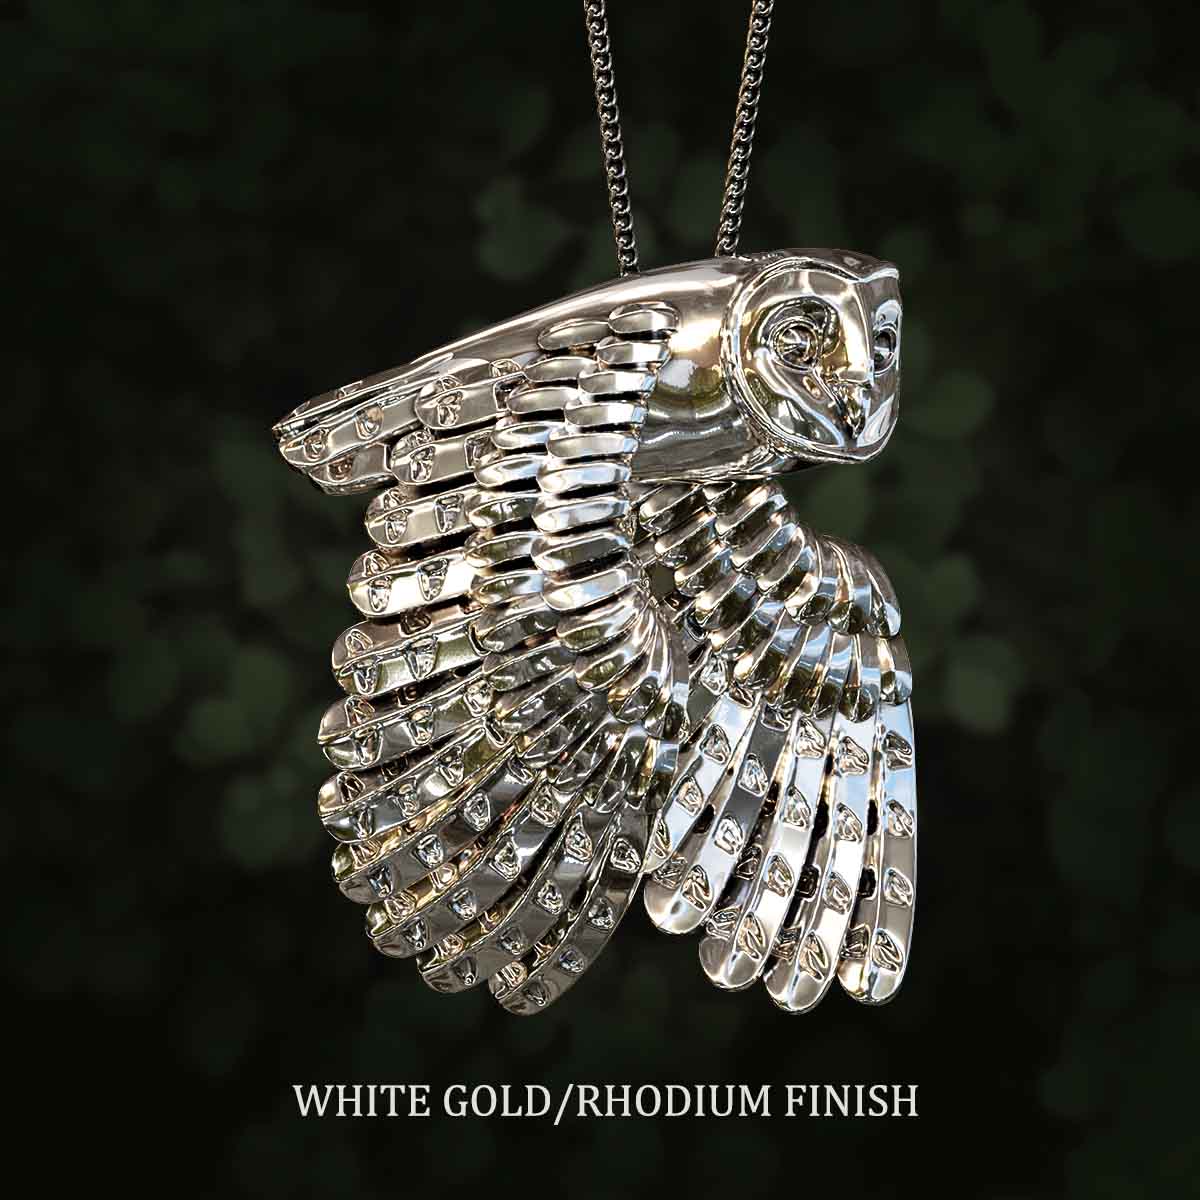 White-Gold-Rhodium-Flying-Barn-Owl-Pendant-Jewelry-For-Necklace